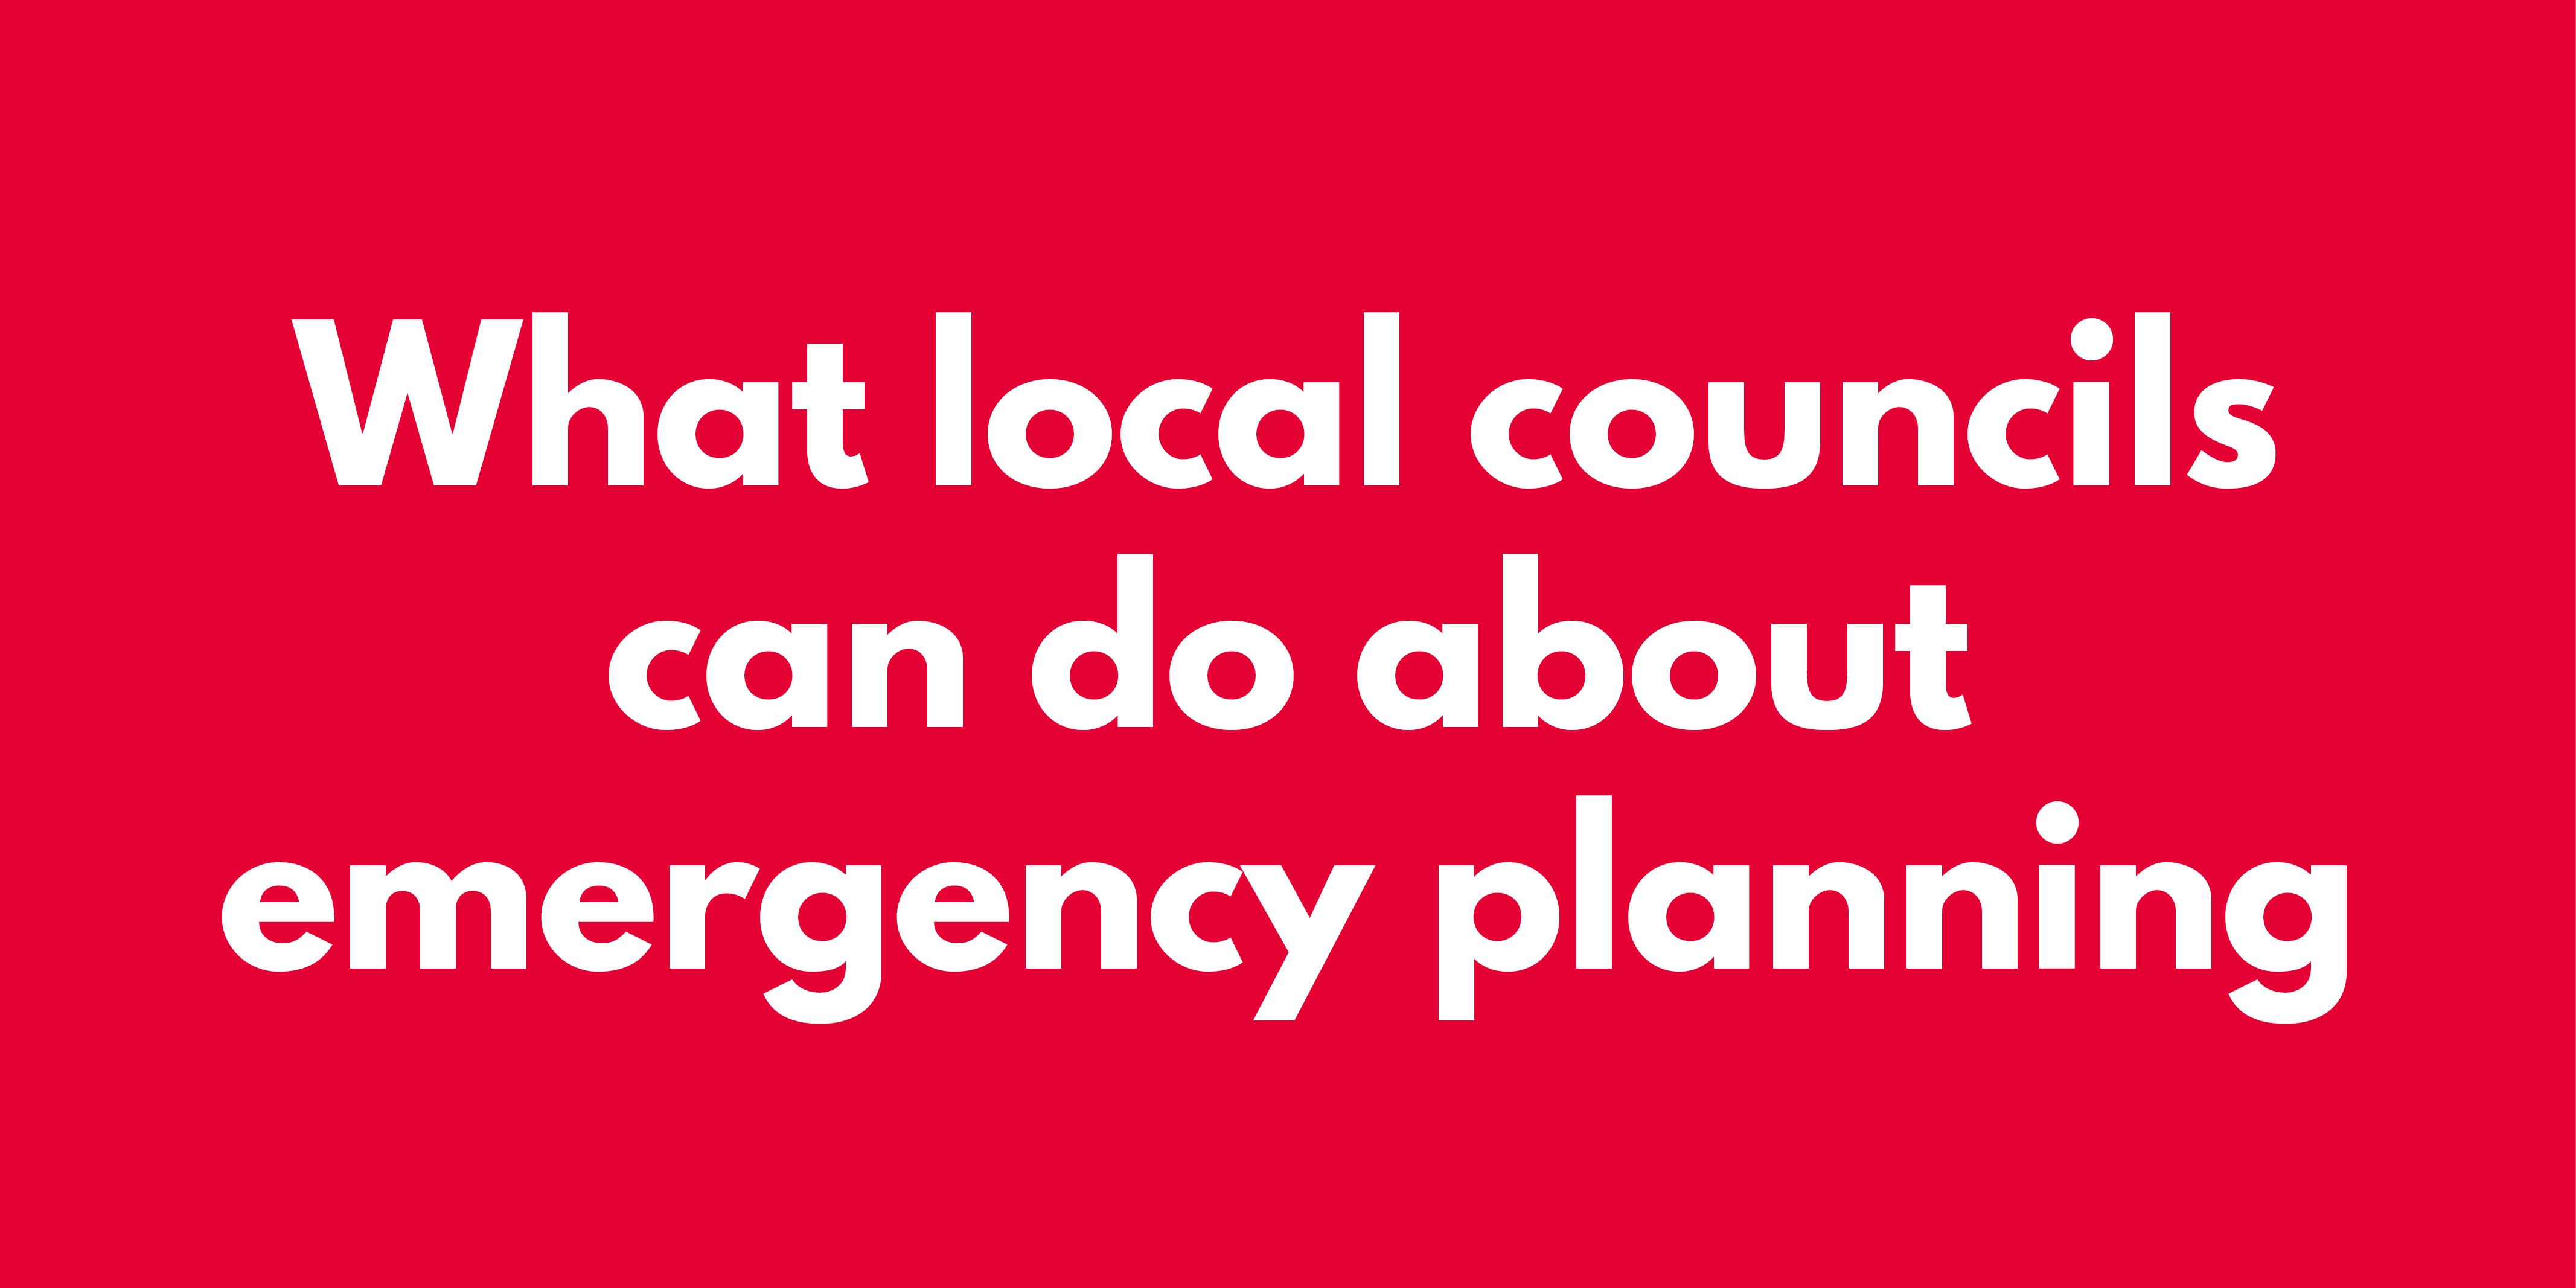 What-local-councils-can-do-about-emergency-planning